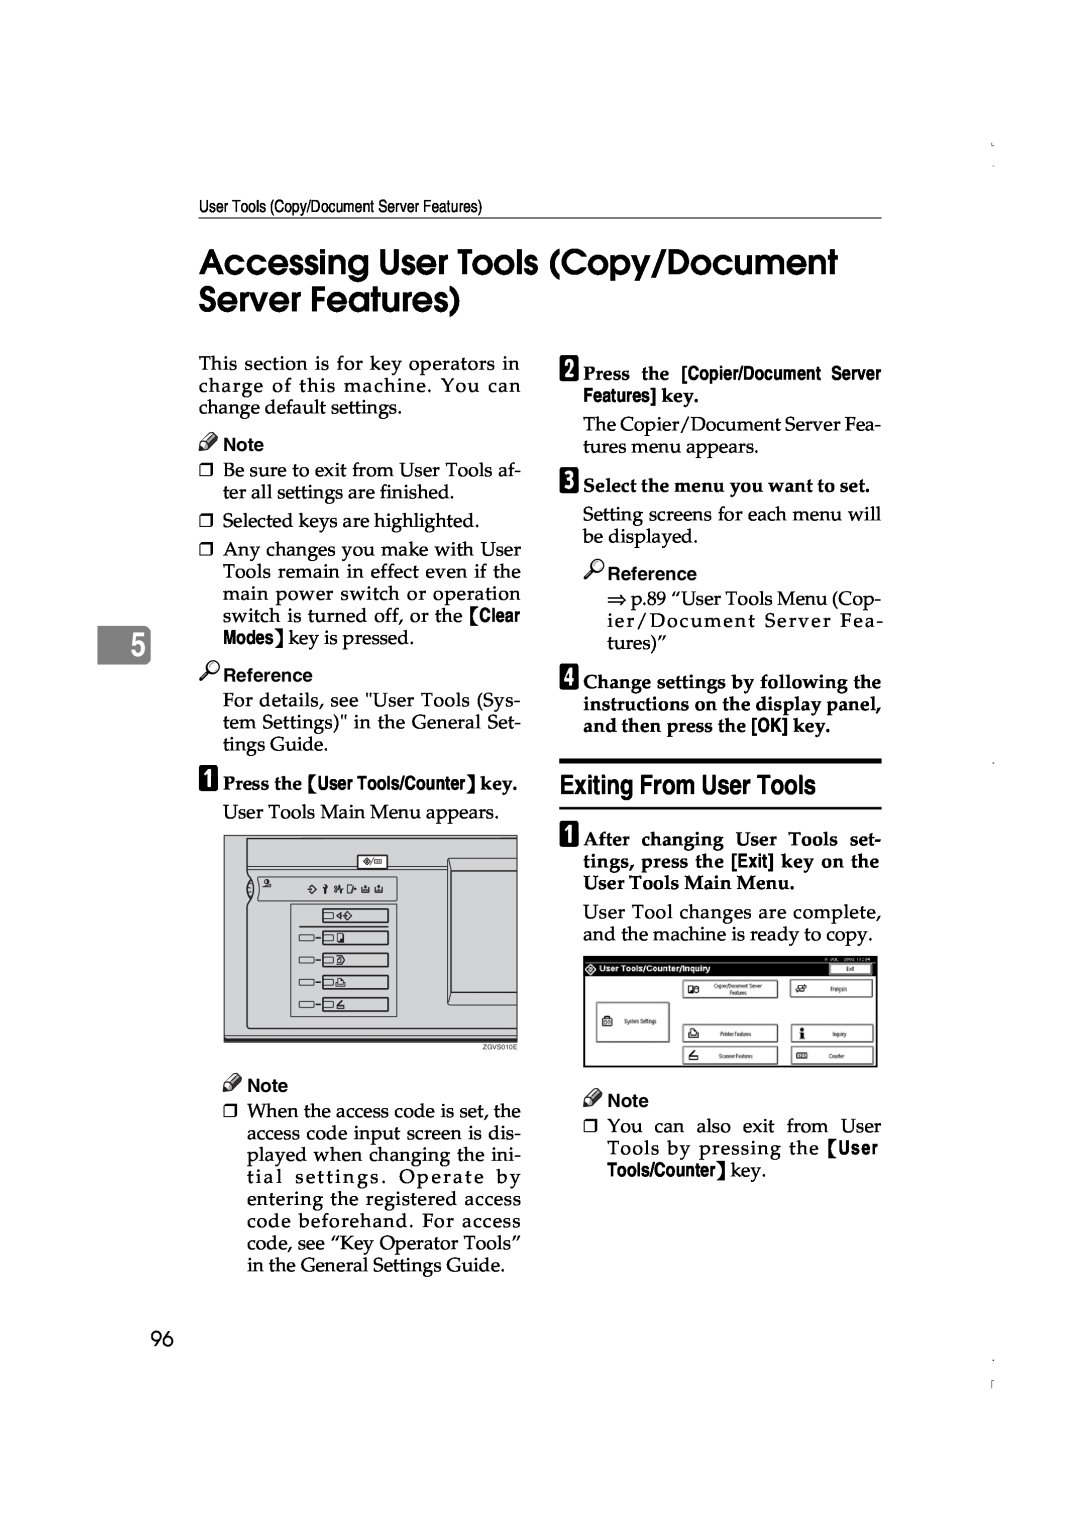 Lanier LD075 Accessing User Tools Copy/Document Server Features, Exiting From User Tools, Modes key is pressed, Reference 